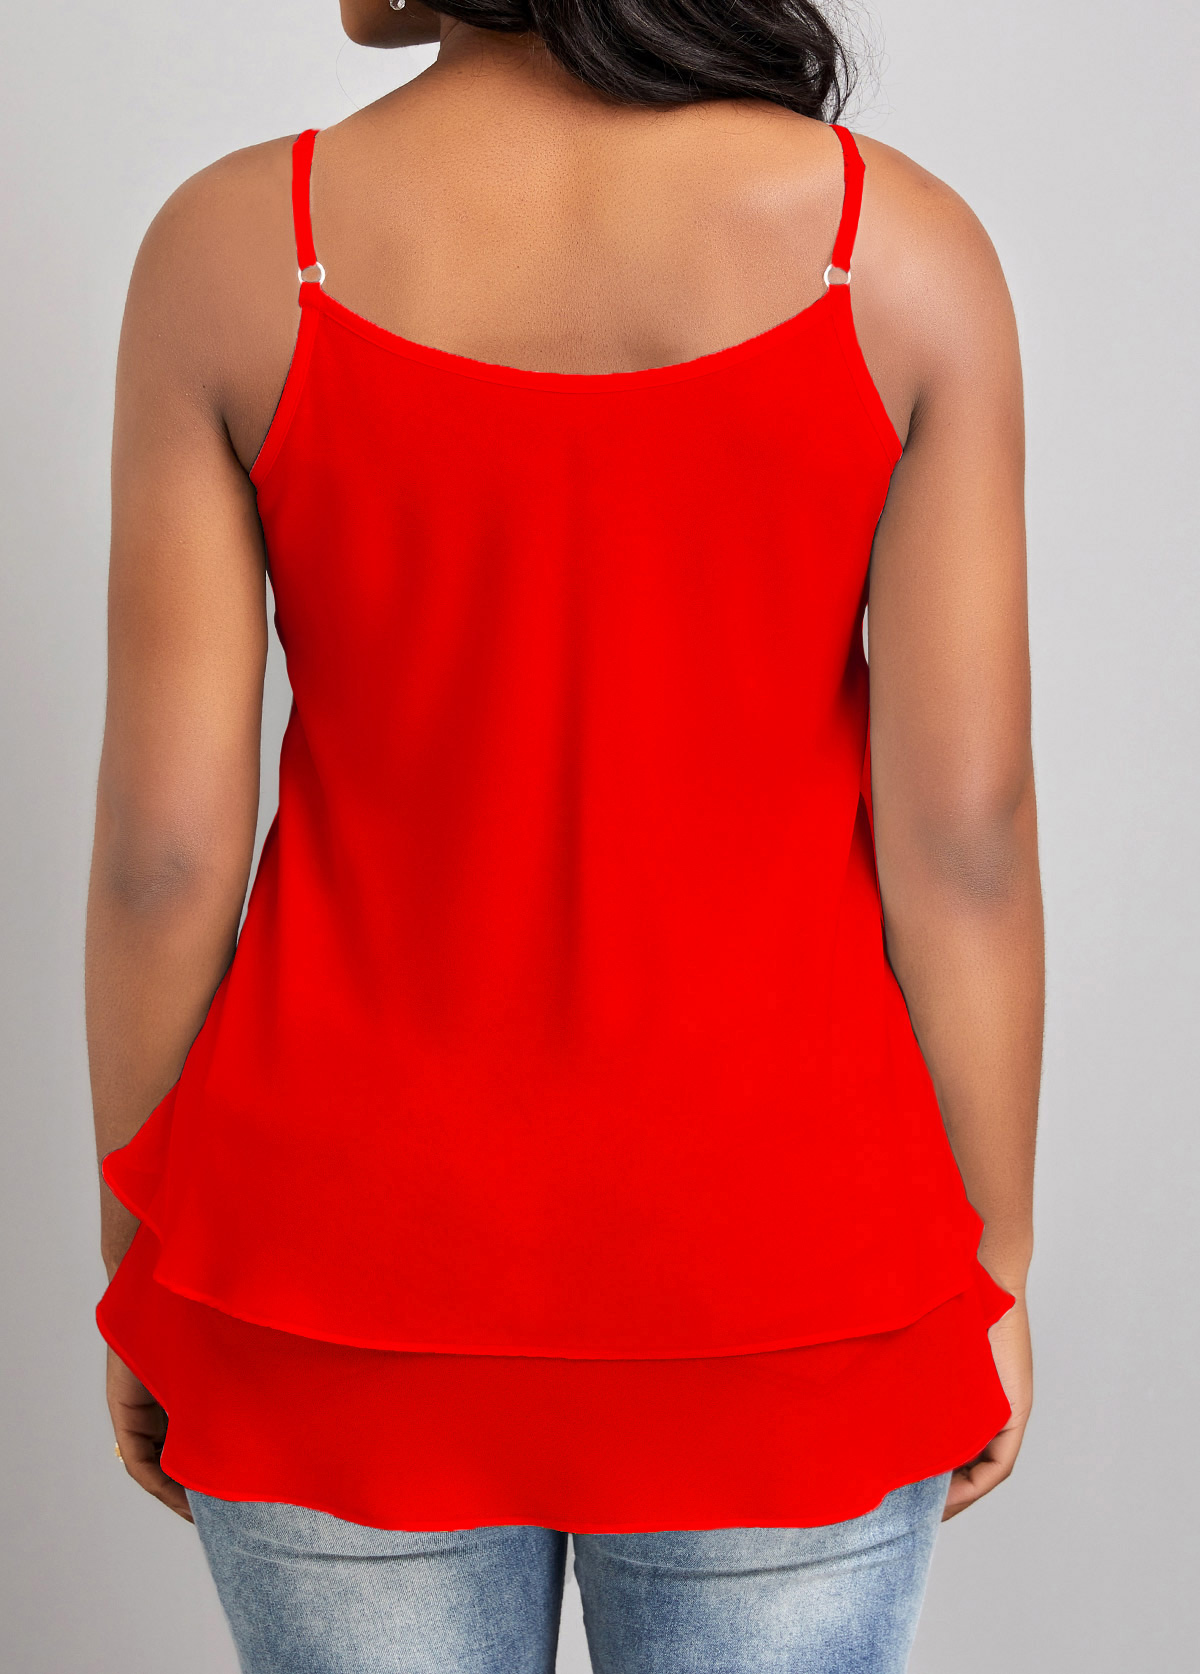 Red Scoop Neck Strappy Ruffle Camisole Top